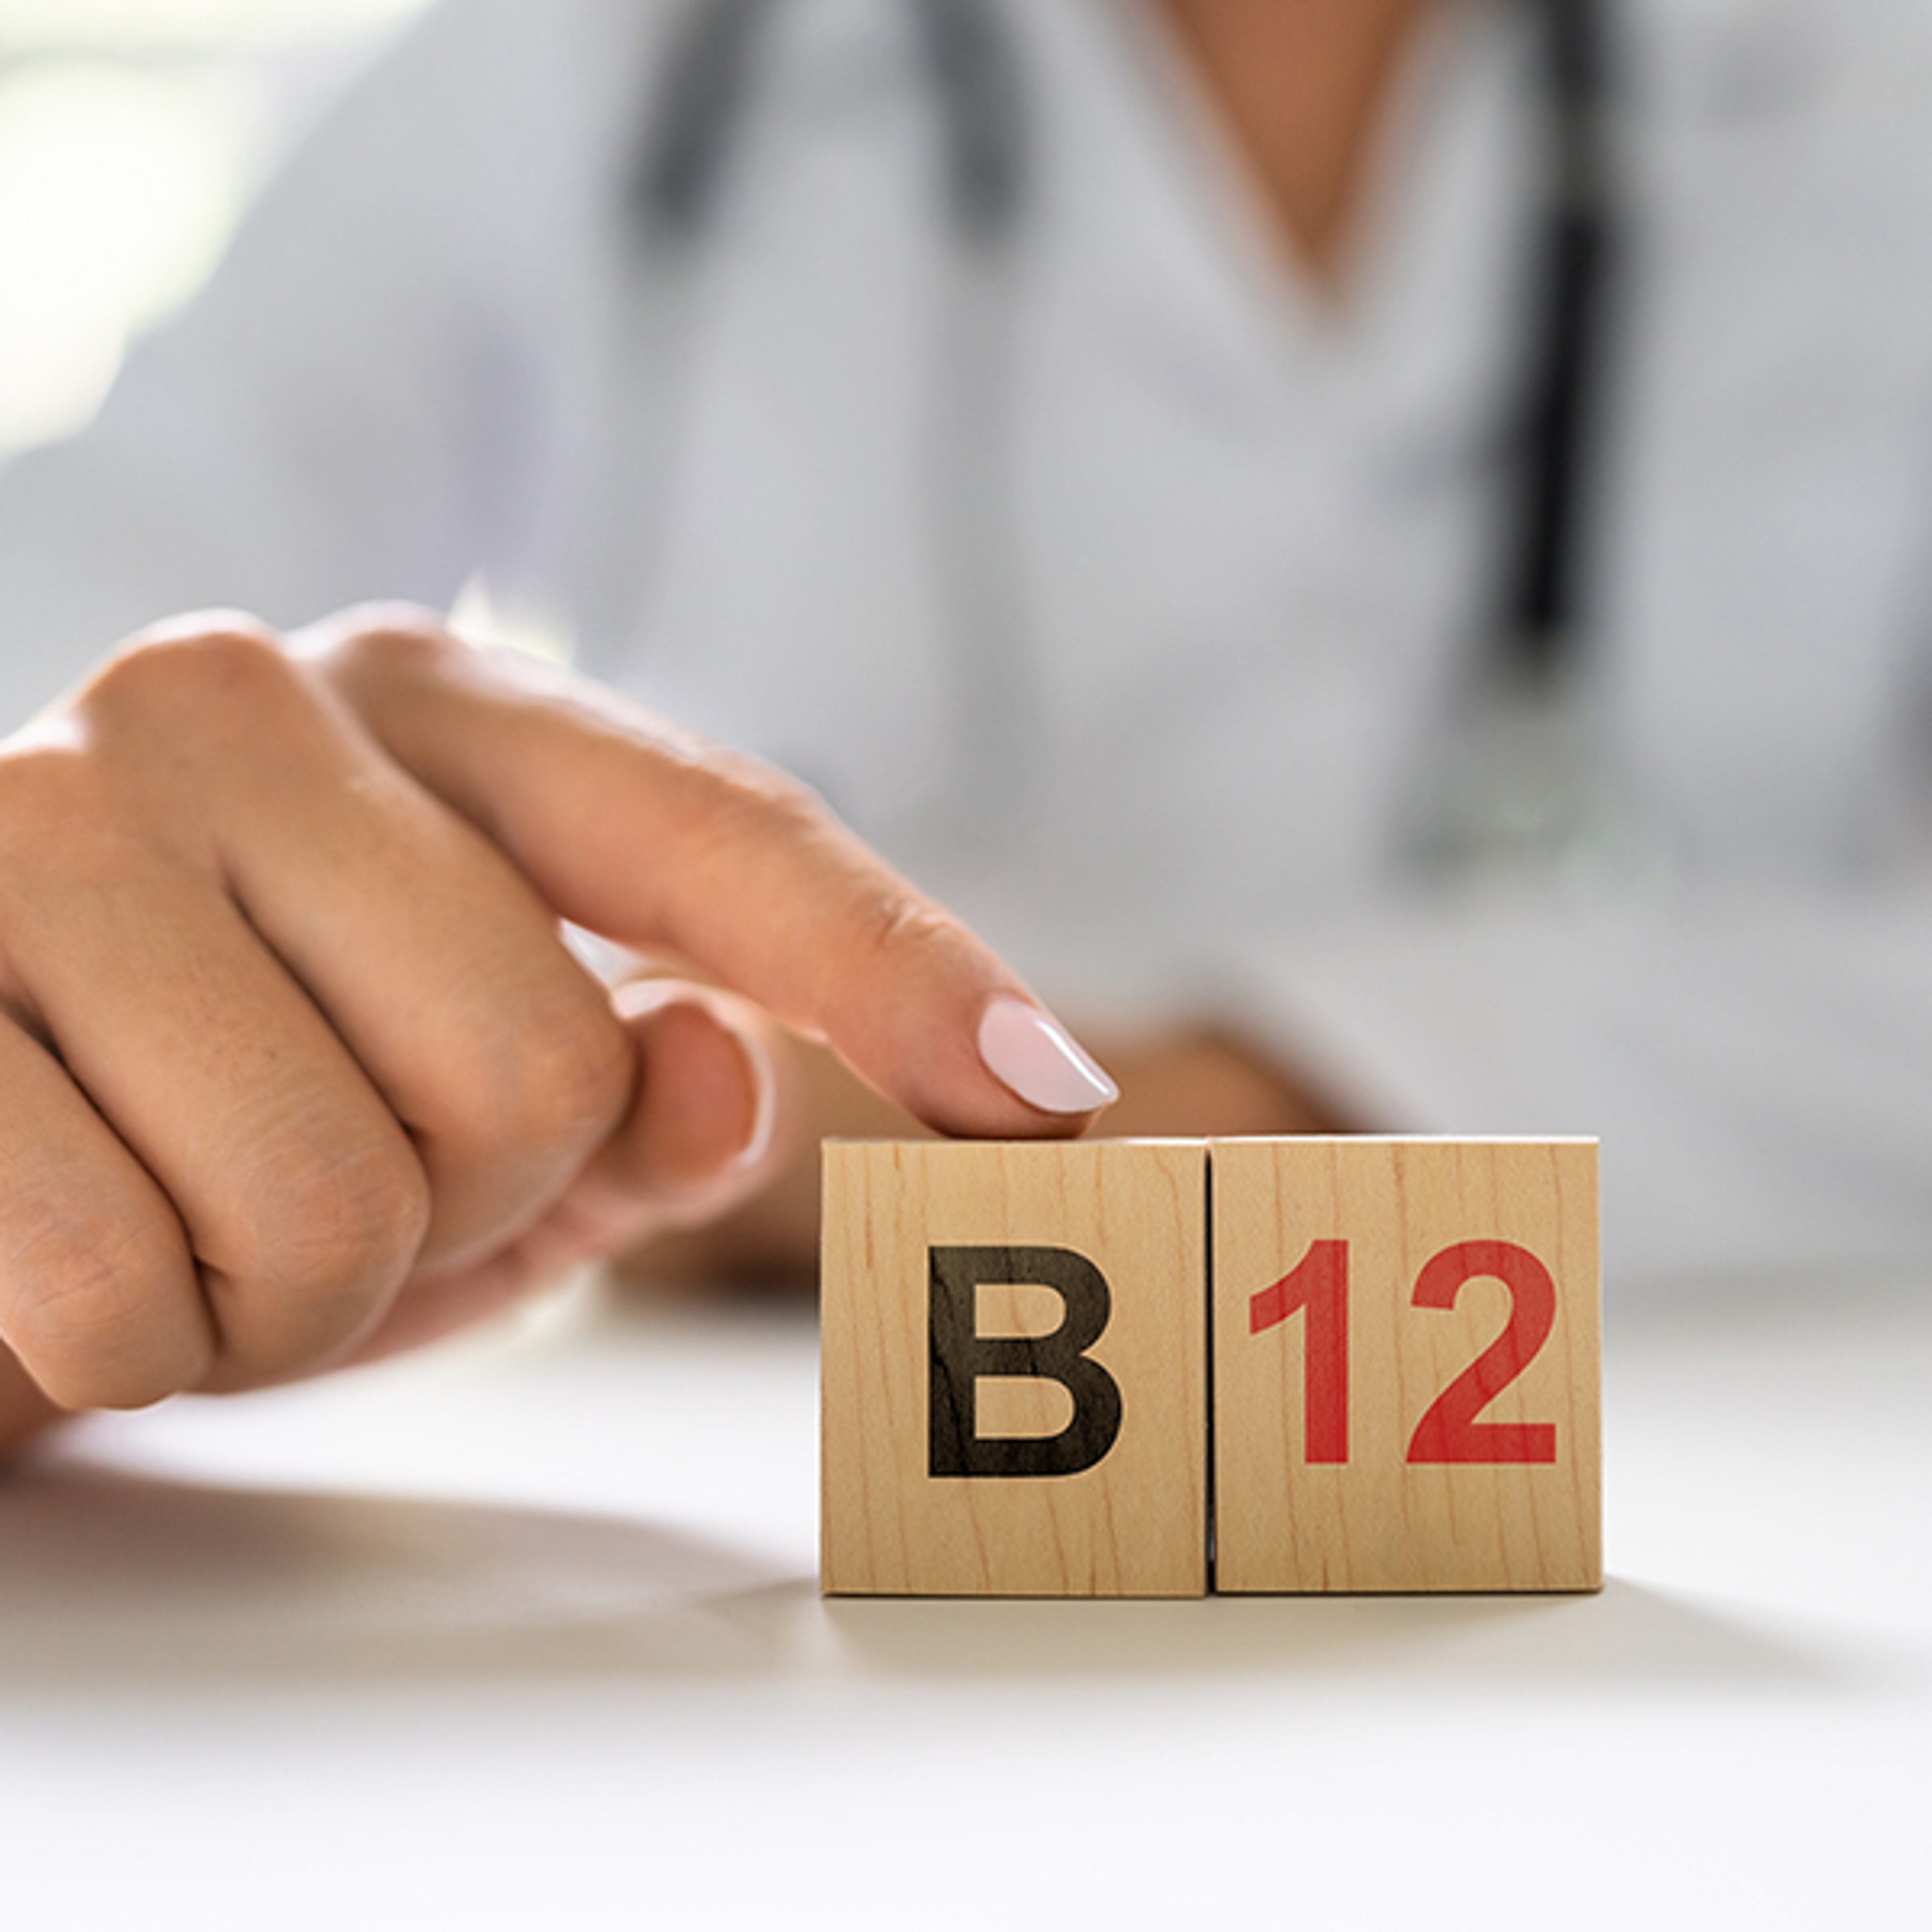 Detect and treat vitamin B12 deficiency on time